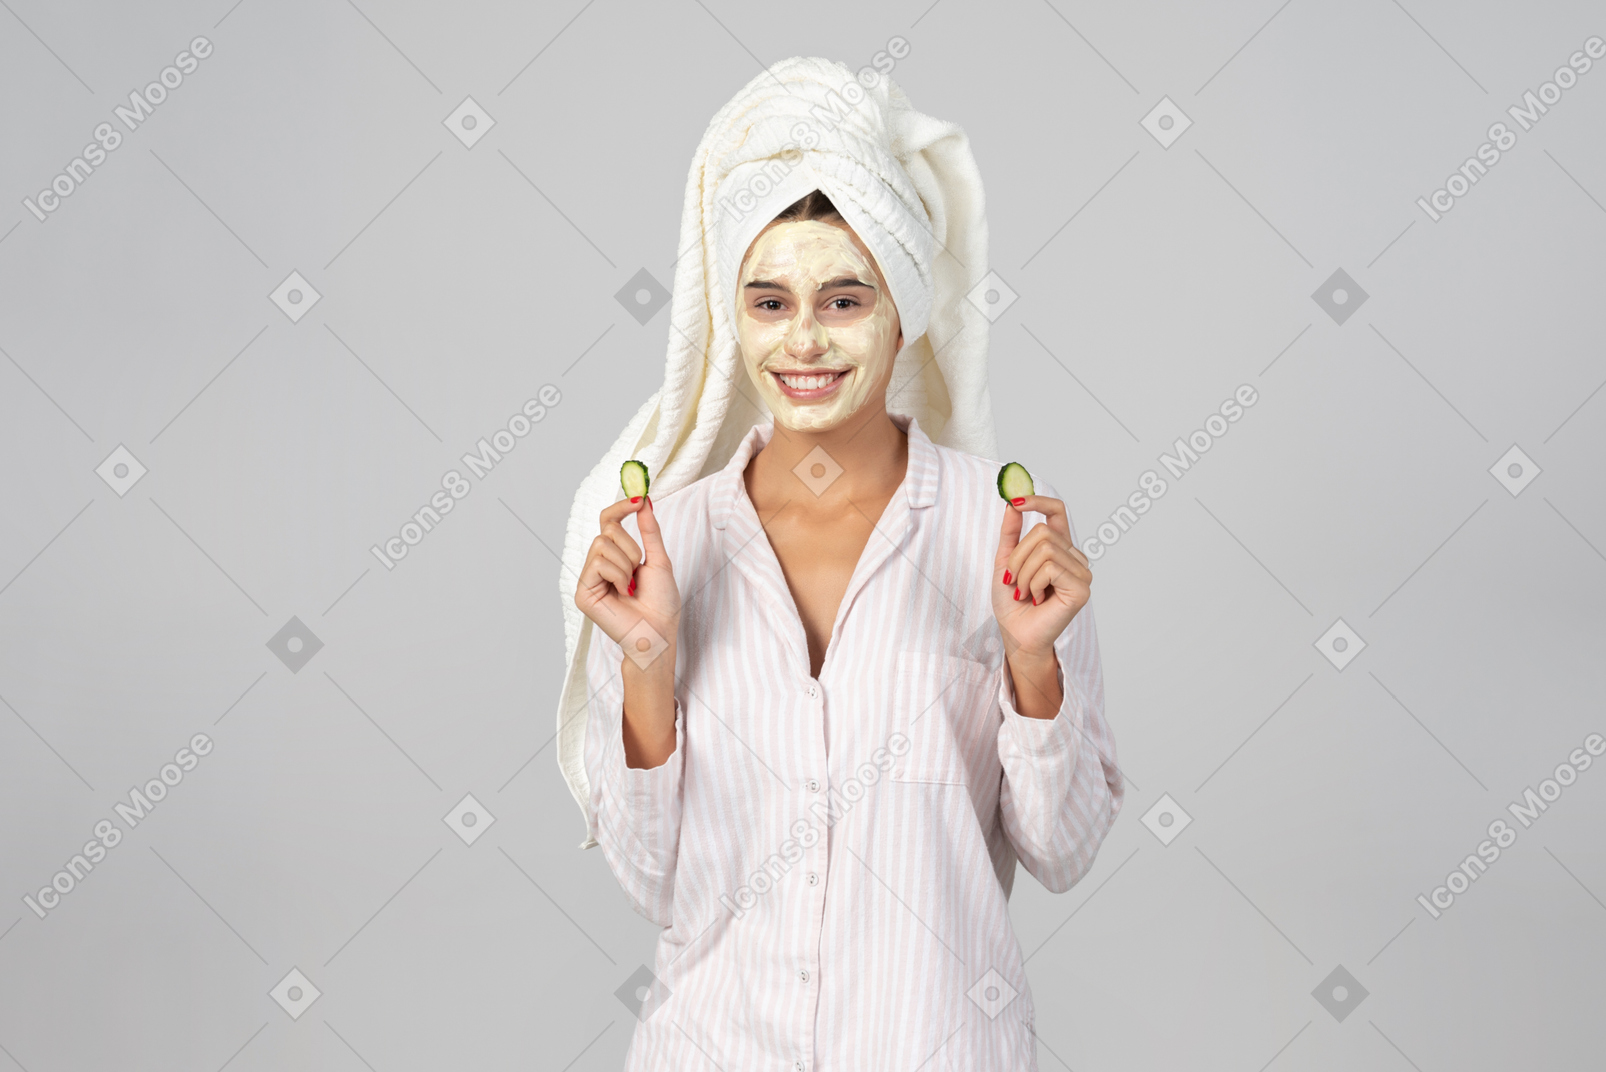 Girl with hair wrapped in towel and mask on her face holding cucumber slices